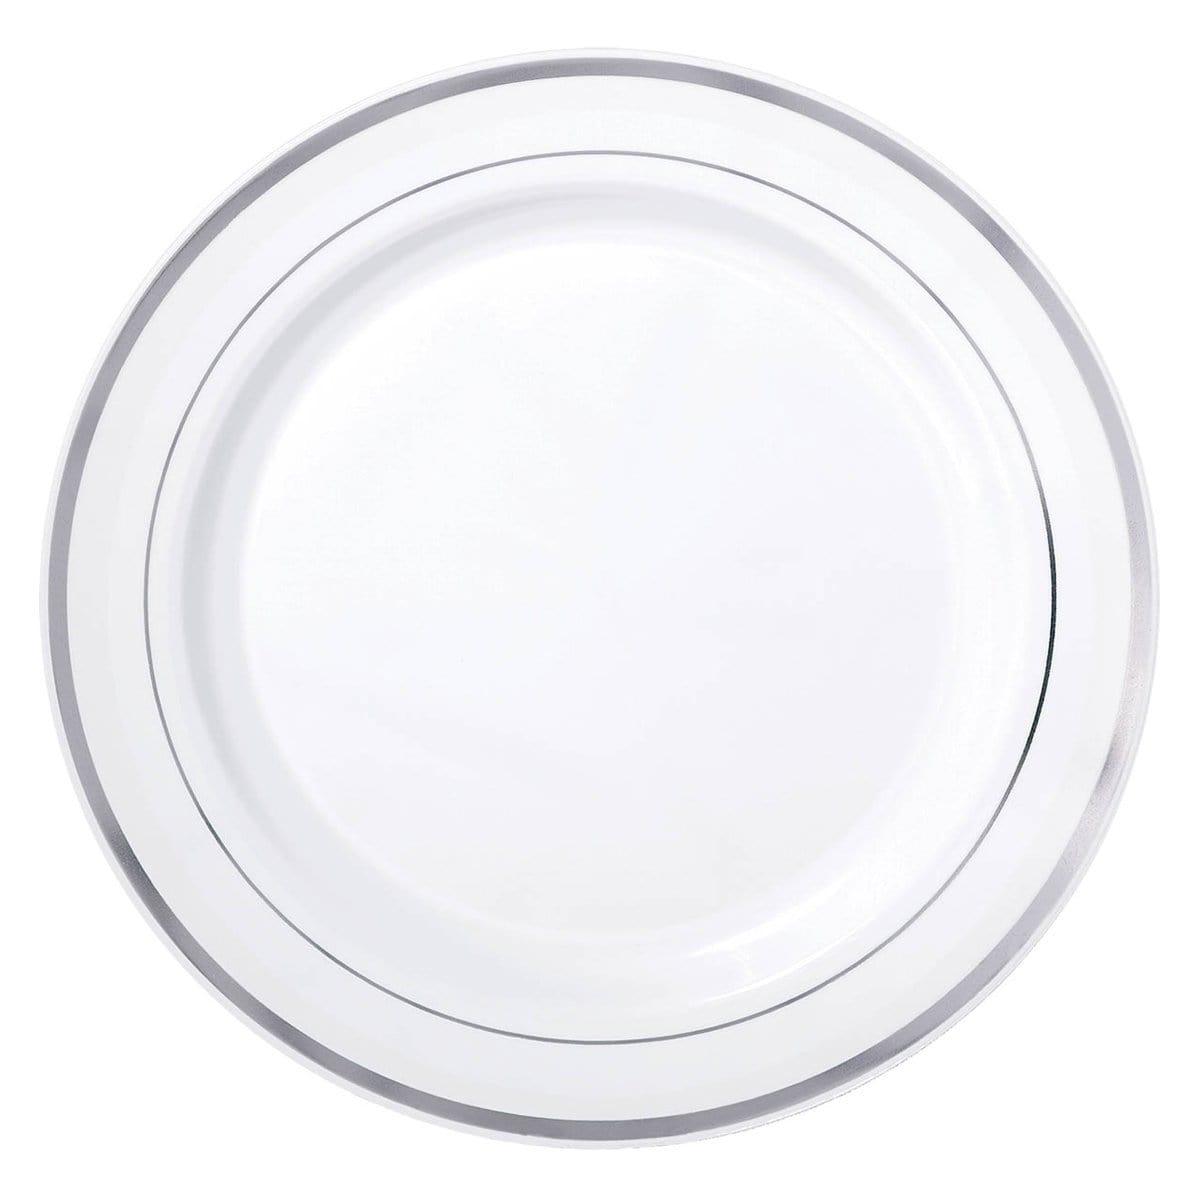 Buy Plasticware White Tray With Silver Trim 12/pkg sold at Party Expert